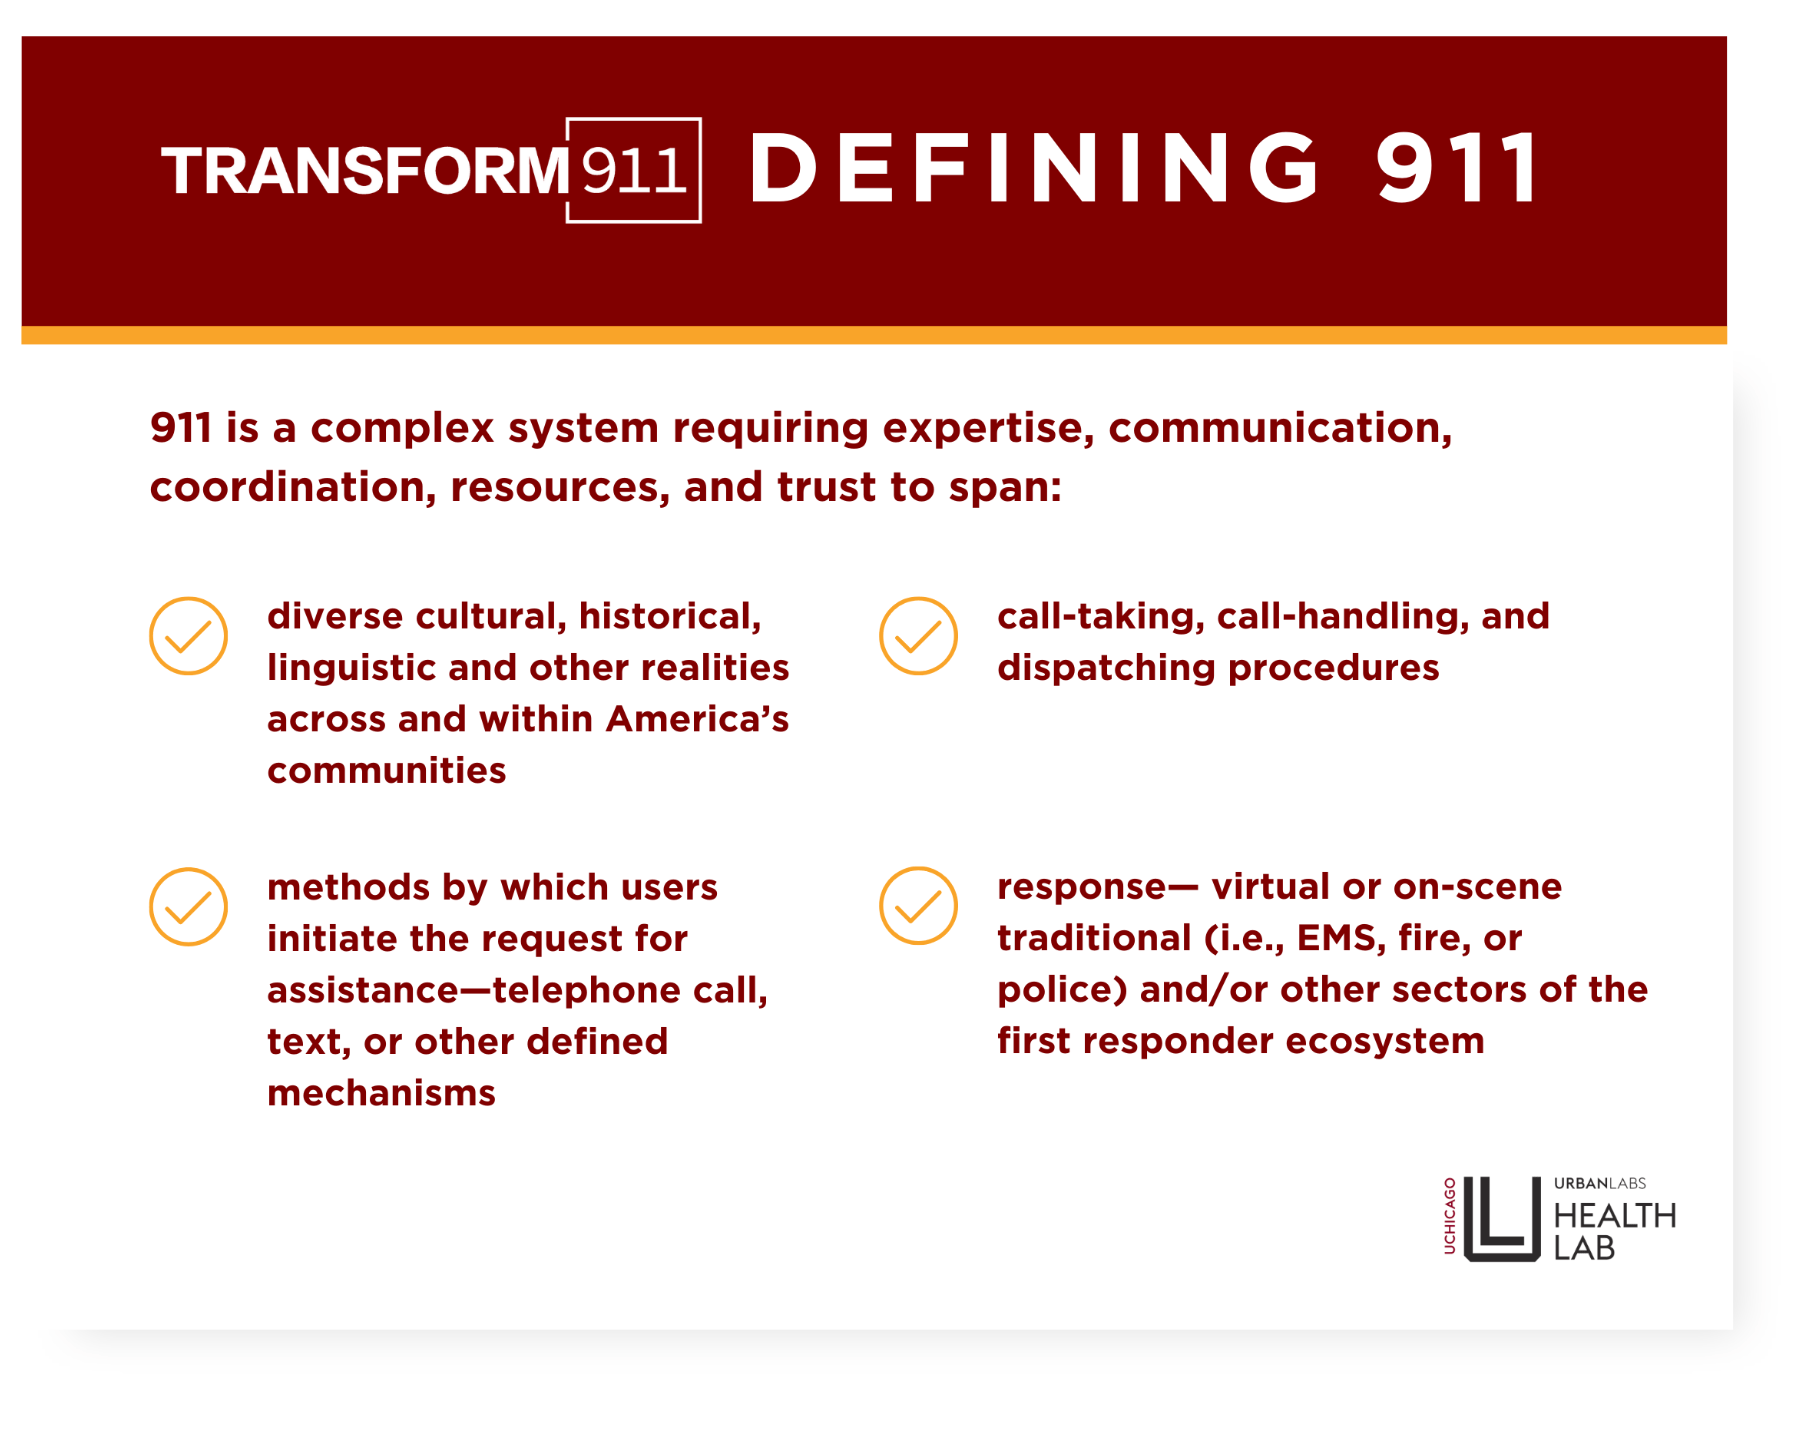 Callout of Transform911's definition of 911, which can be found in the paragraph above.